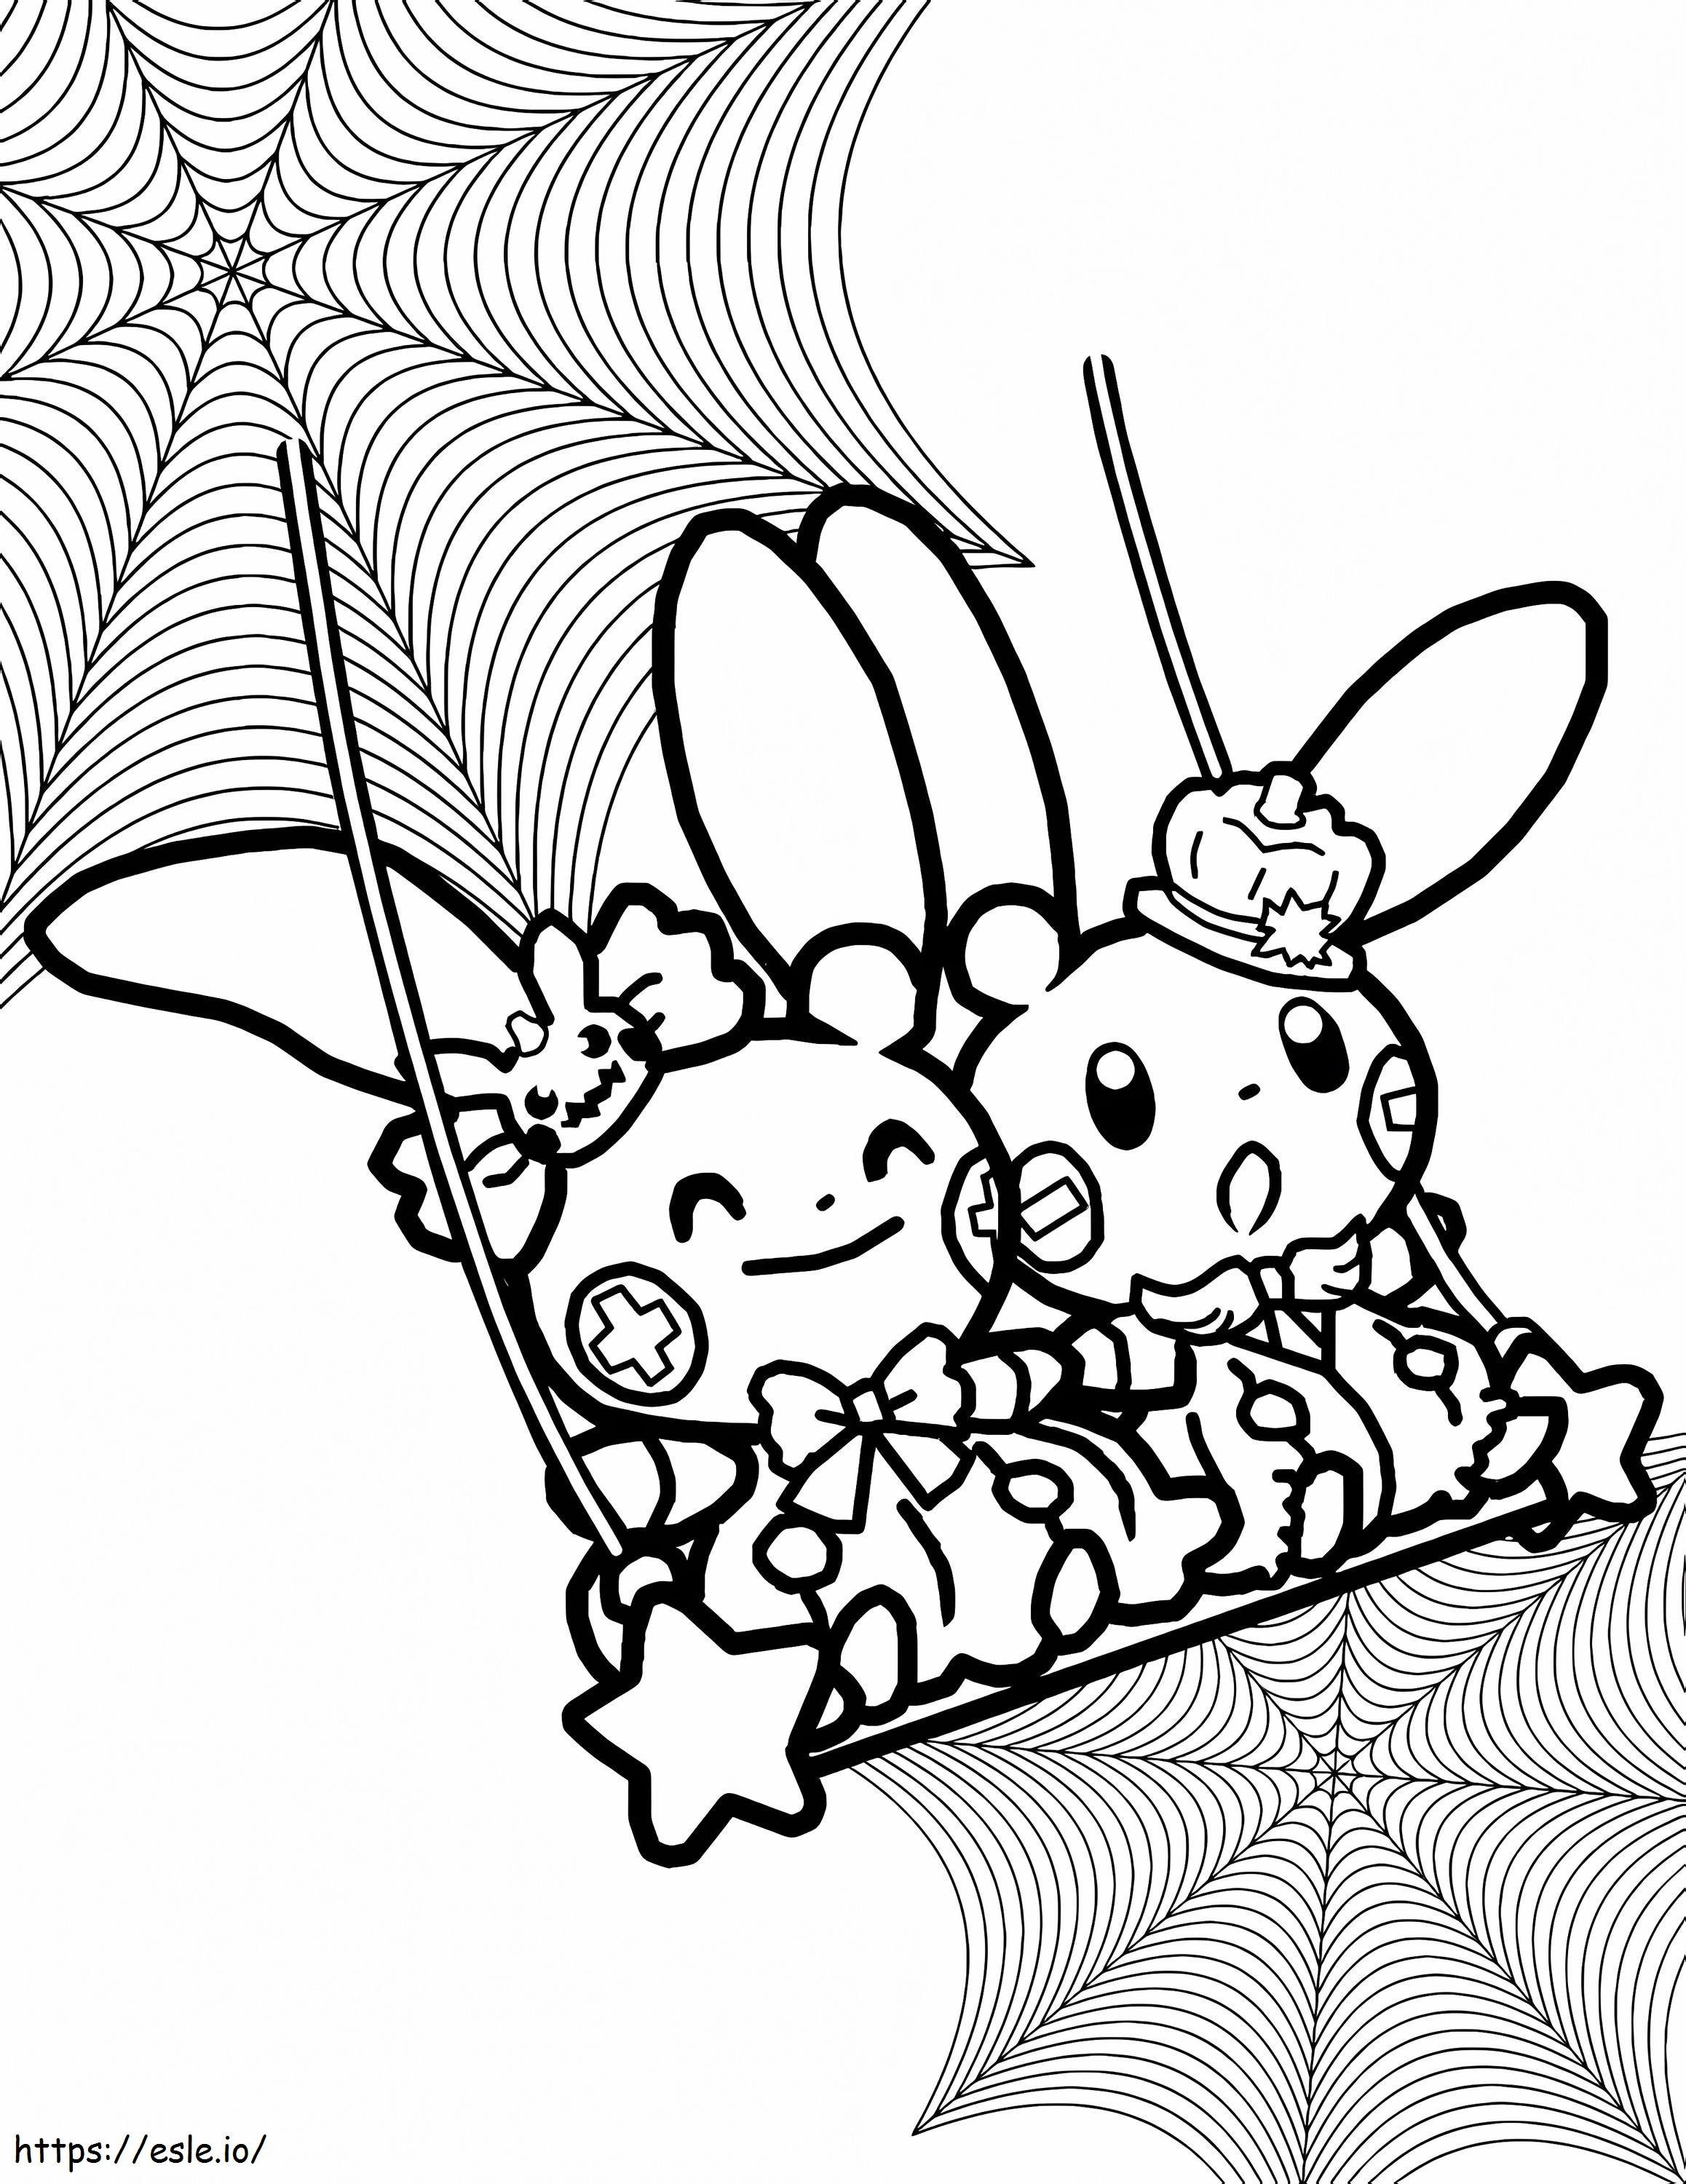 Cute Pokemon On Halloween coloring page